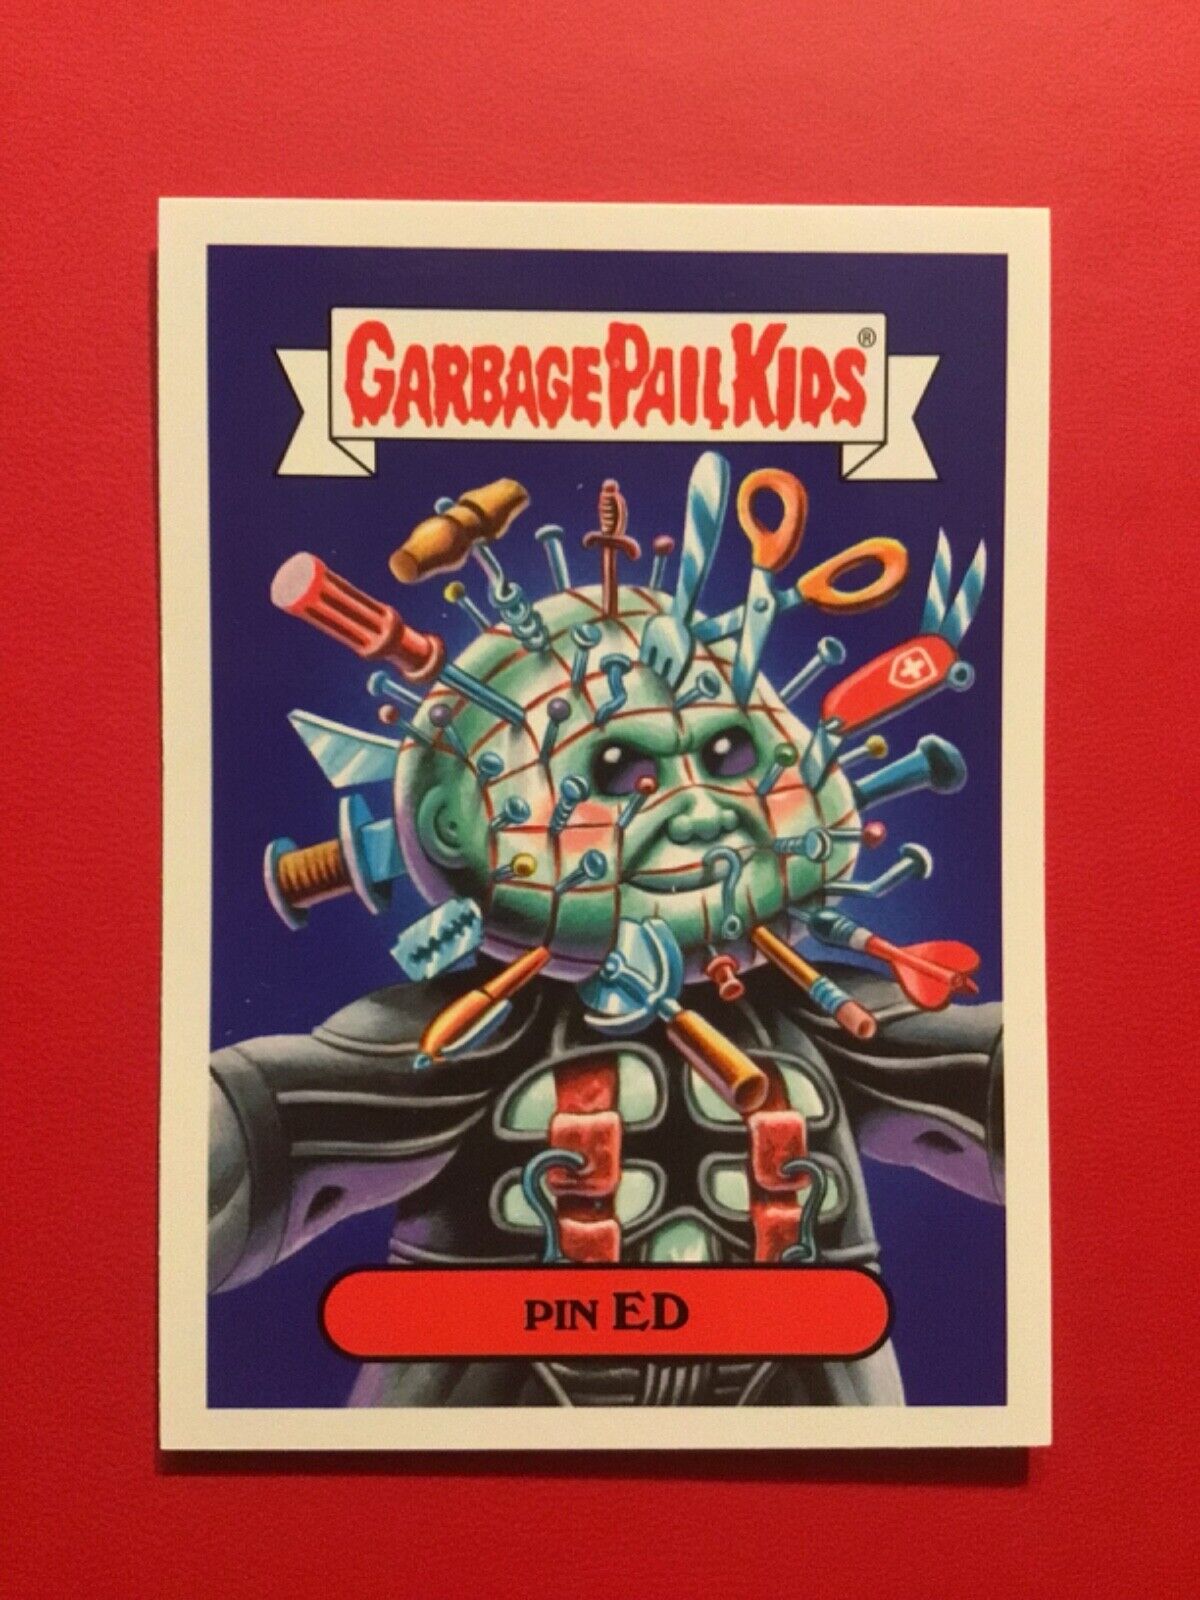 2018 Topps Garbage Pail Kids Oh The Horror-ible -NM- You Pick (Buy 3 Get 1 Free)